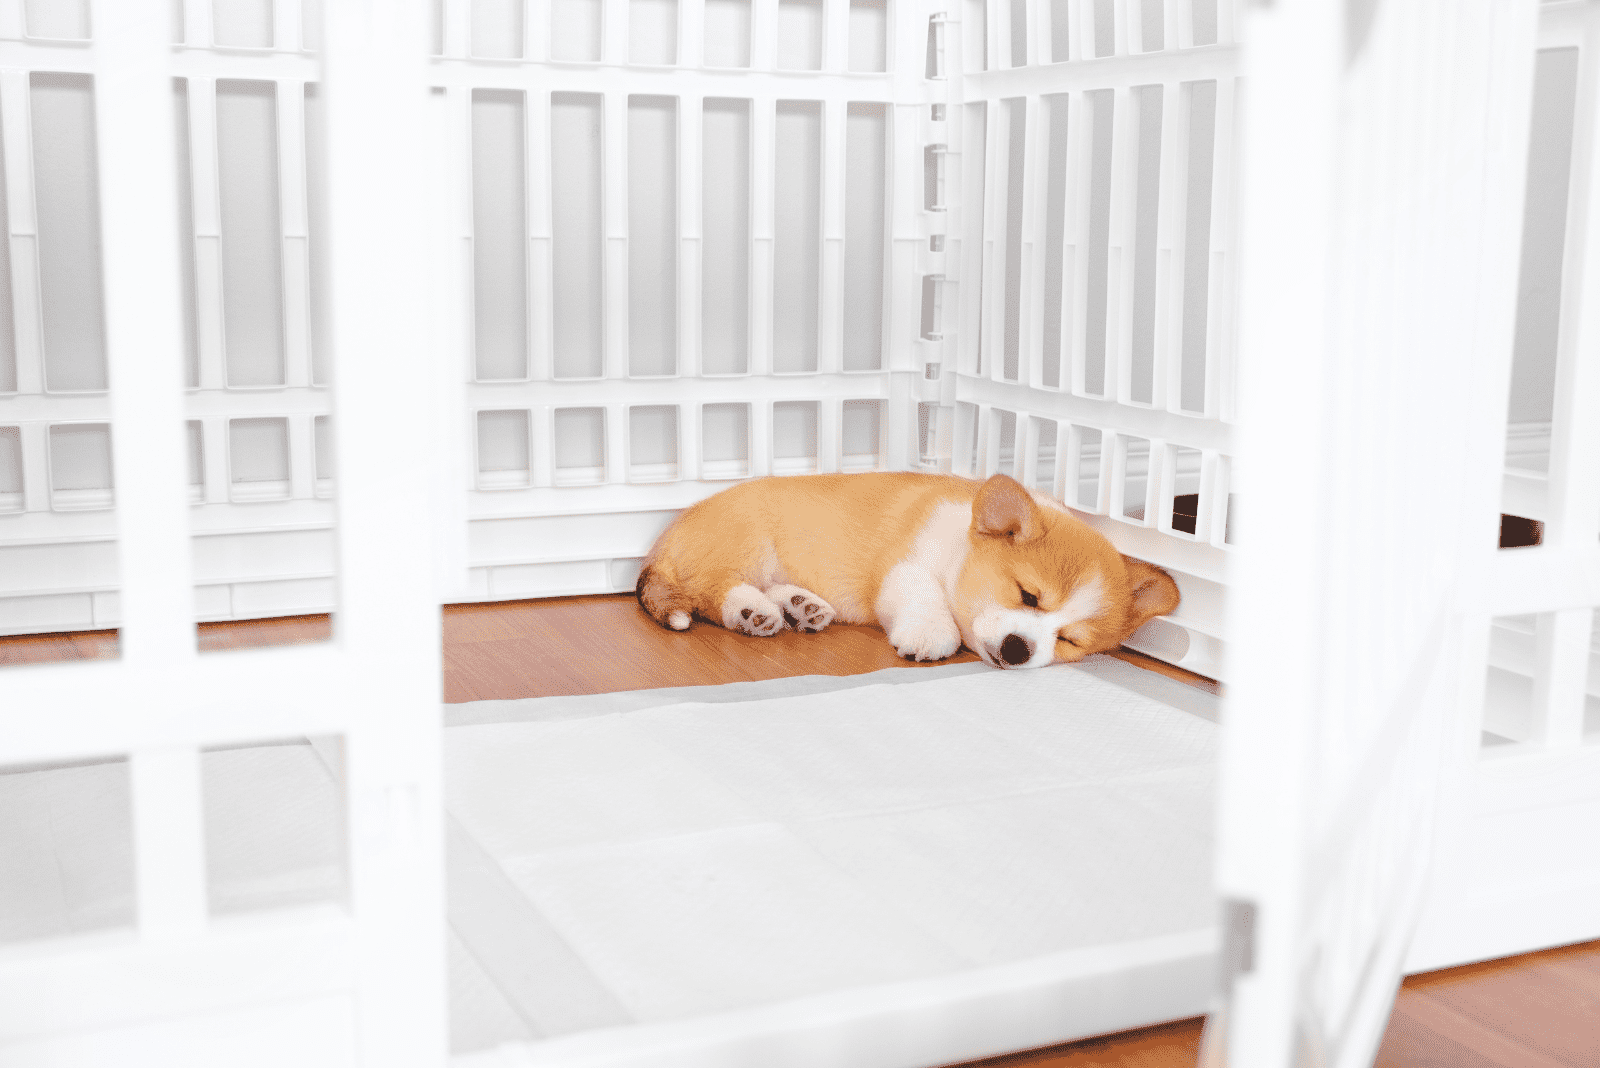 the dog is lying in the cage